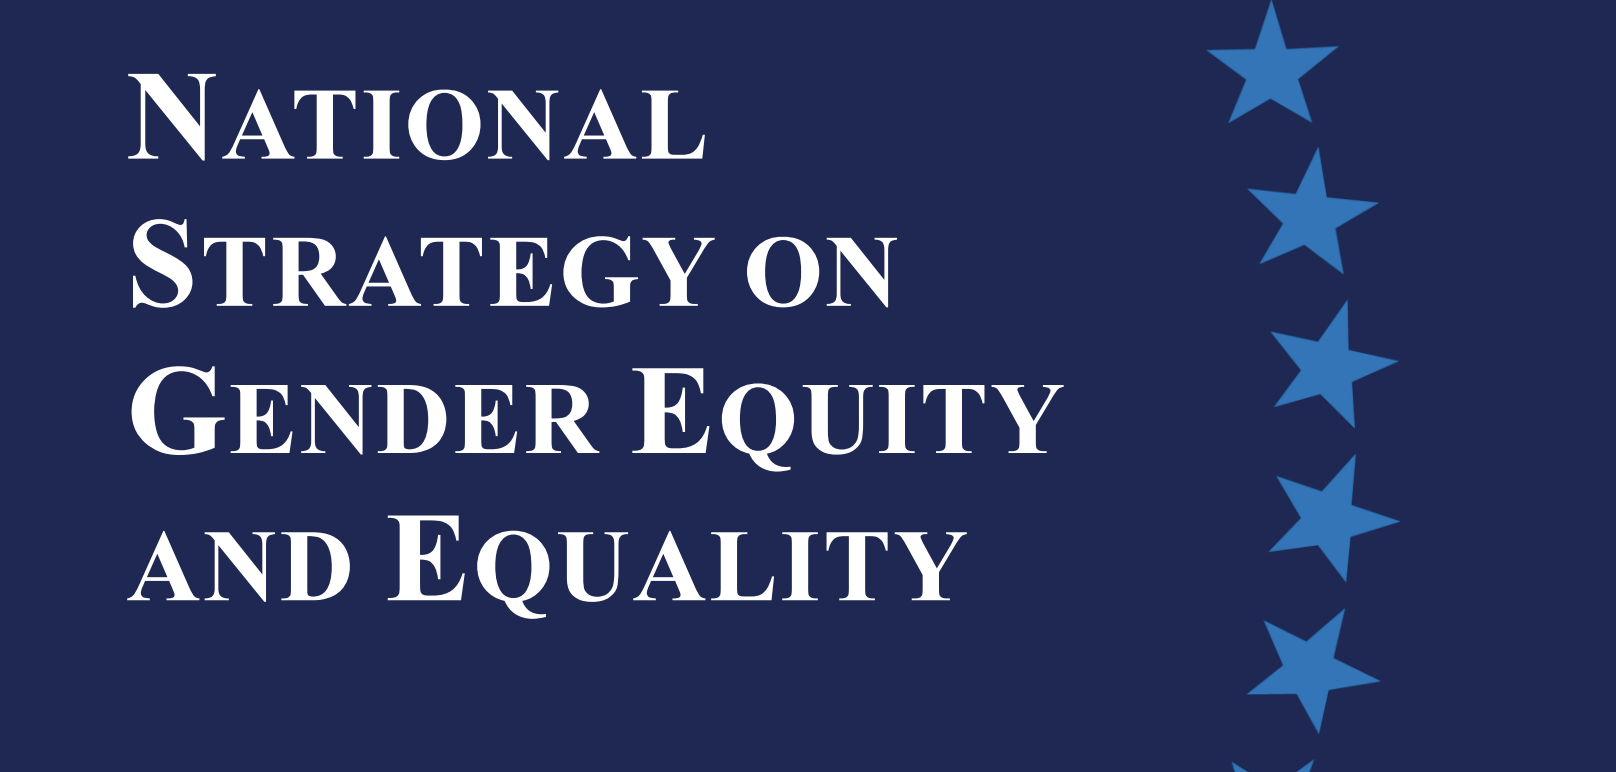 Legislative update: The Biden Administration's National Strategy on Gender Equity and Equality